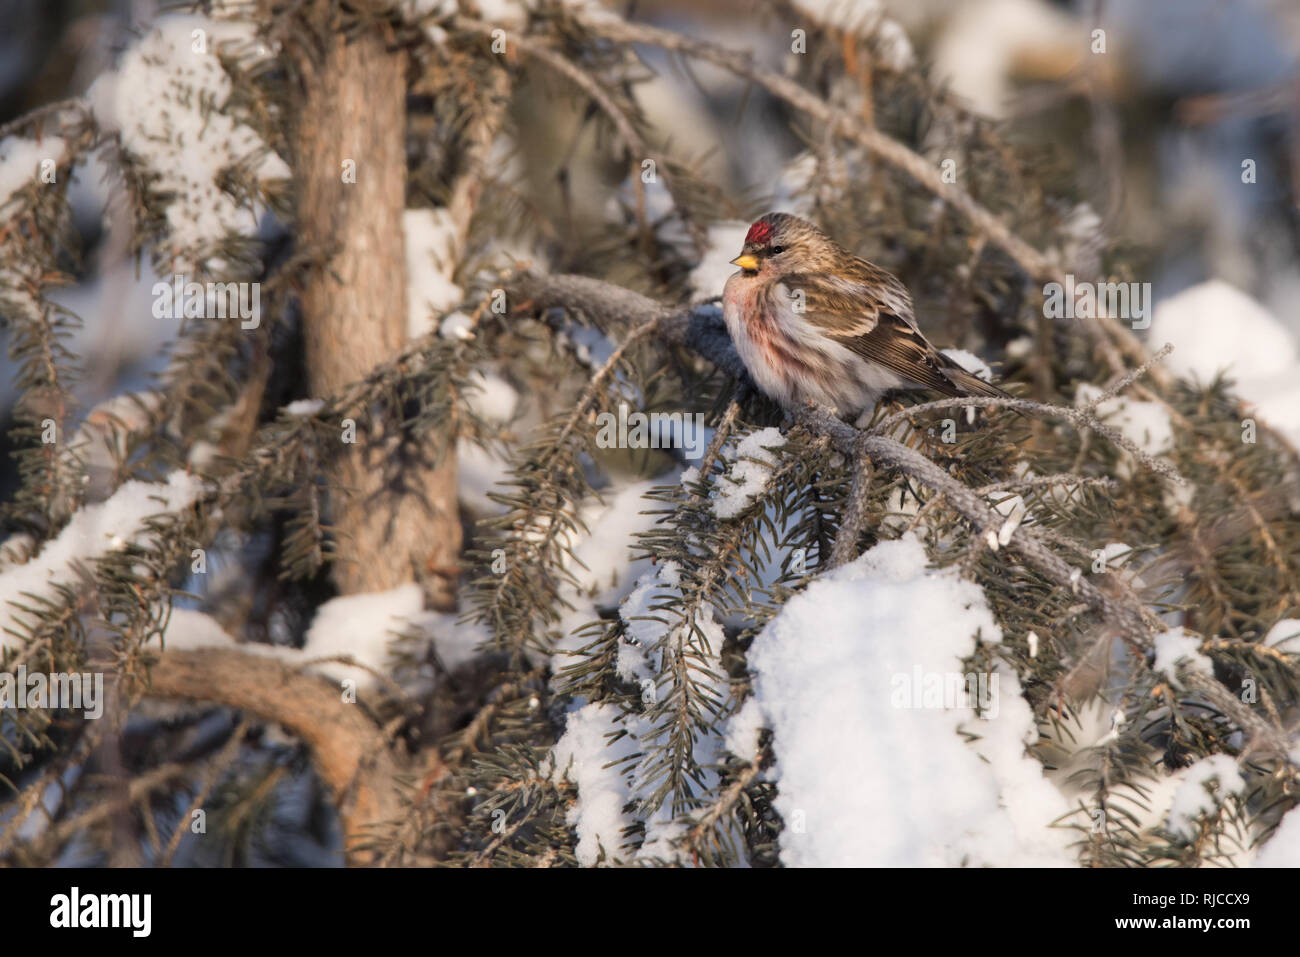 A Common Redpoll perches on a snow-covered pine tree in Yellowknife, Northwest Territories, Canada. Stock Photo